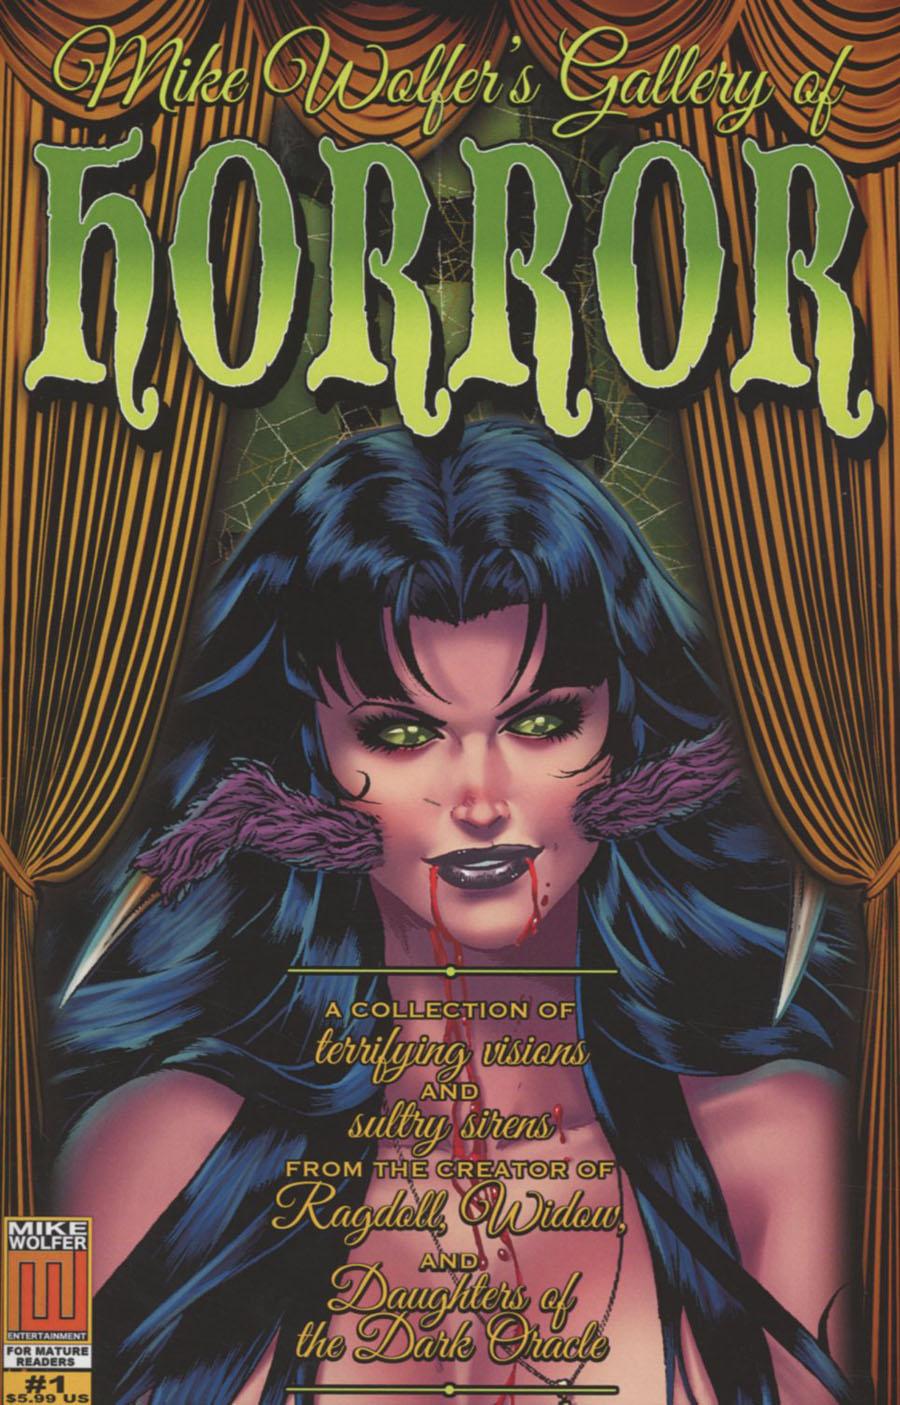 Mike Wolfers Gallery Of Horror Vol. 1 #1